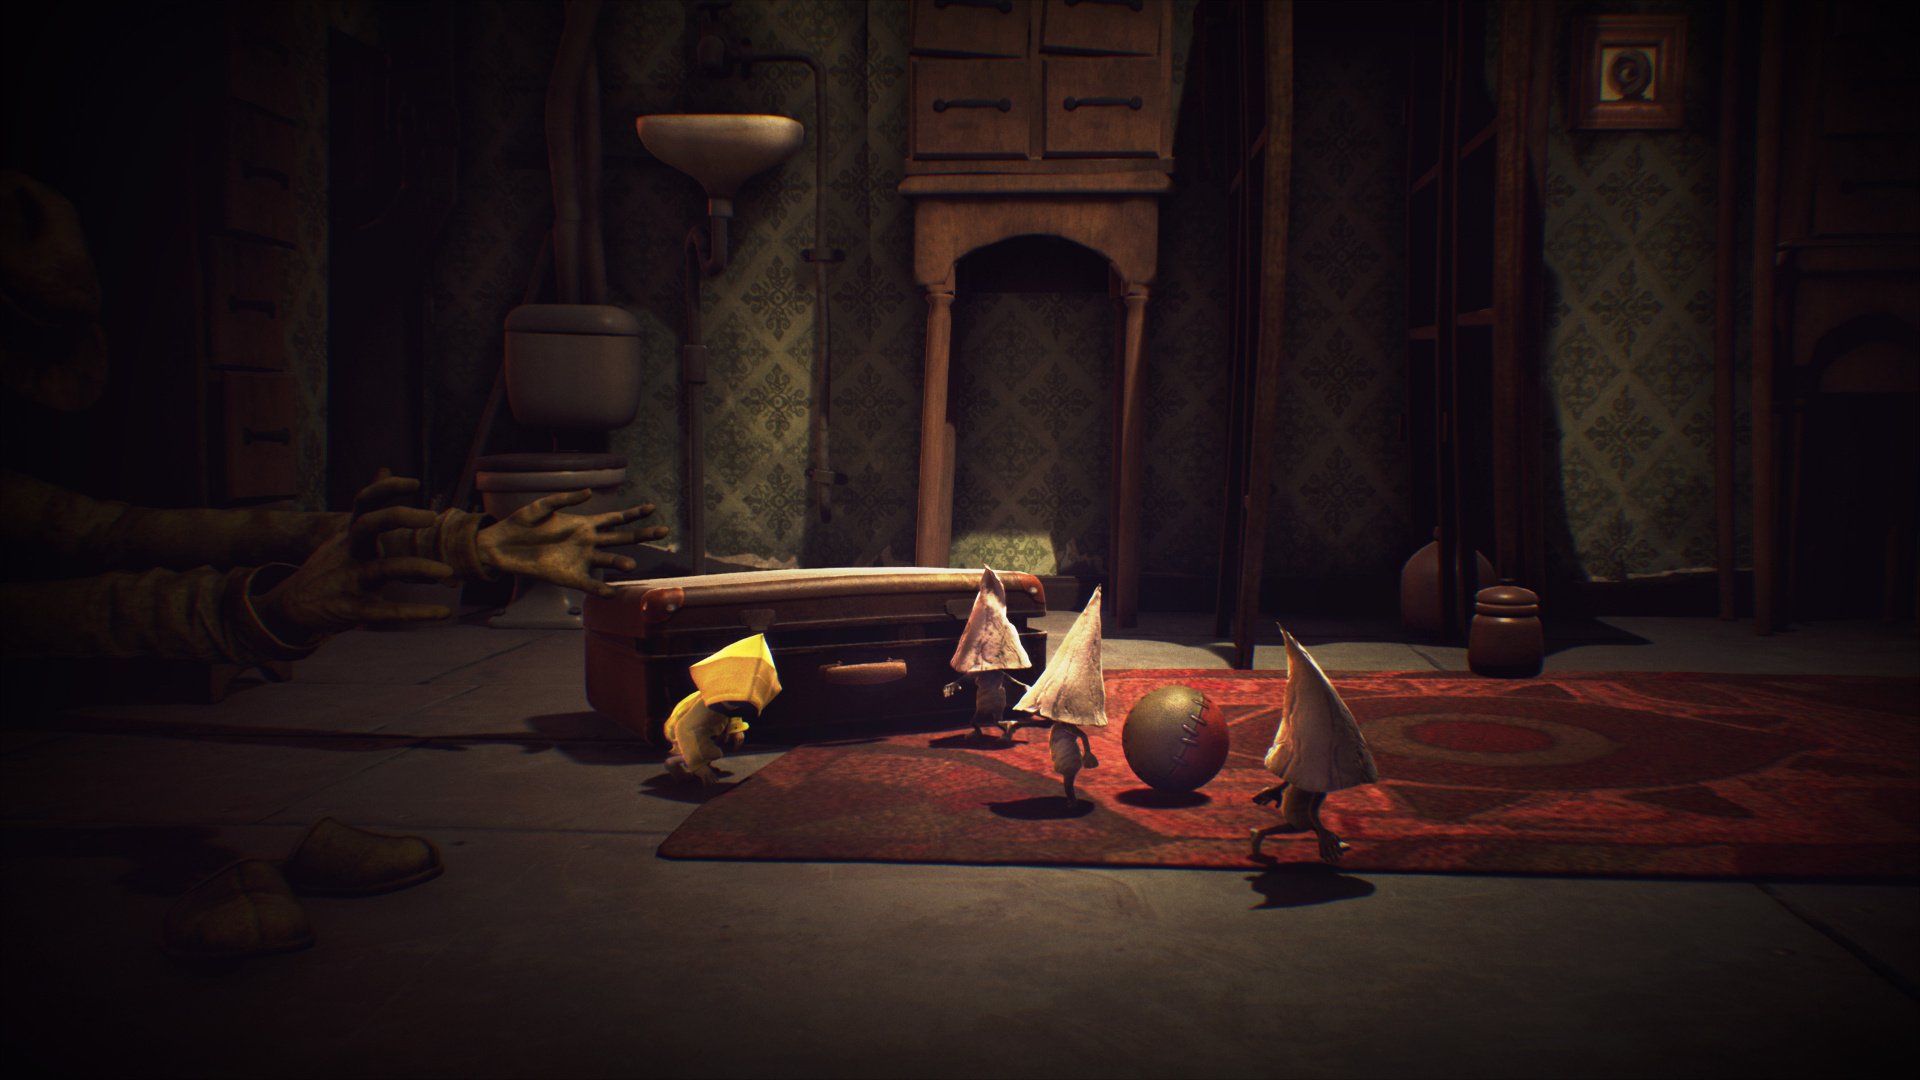 Nintendo switch game little nightmares 2 complete edition, Video